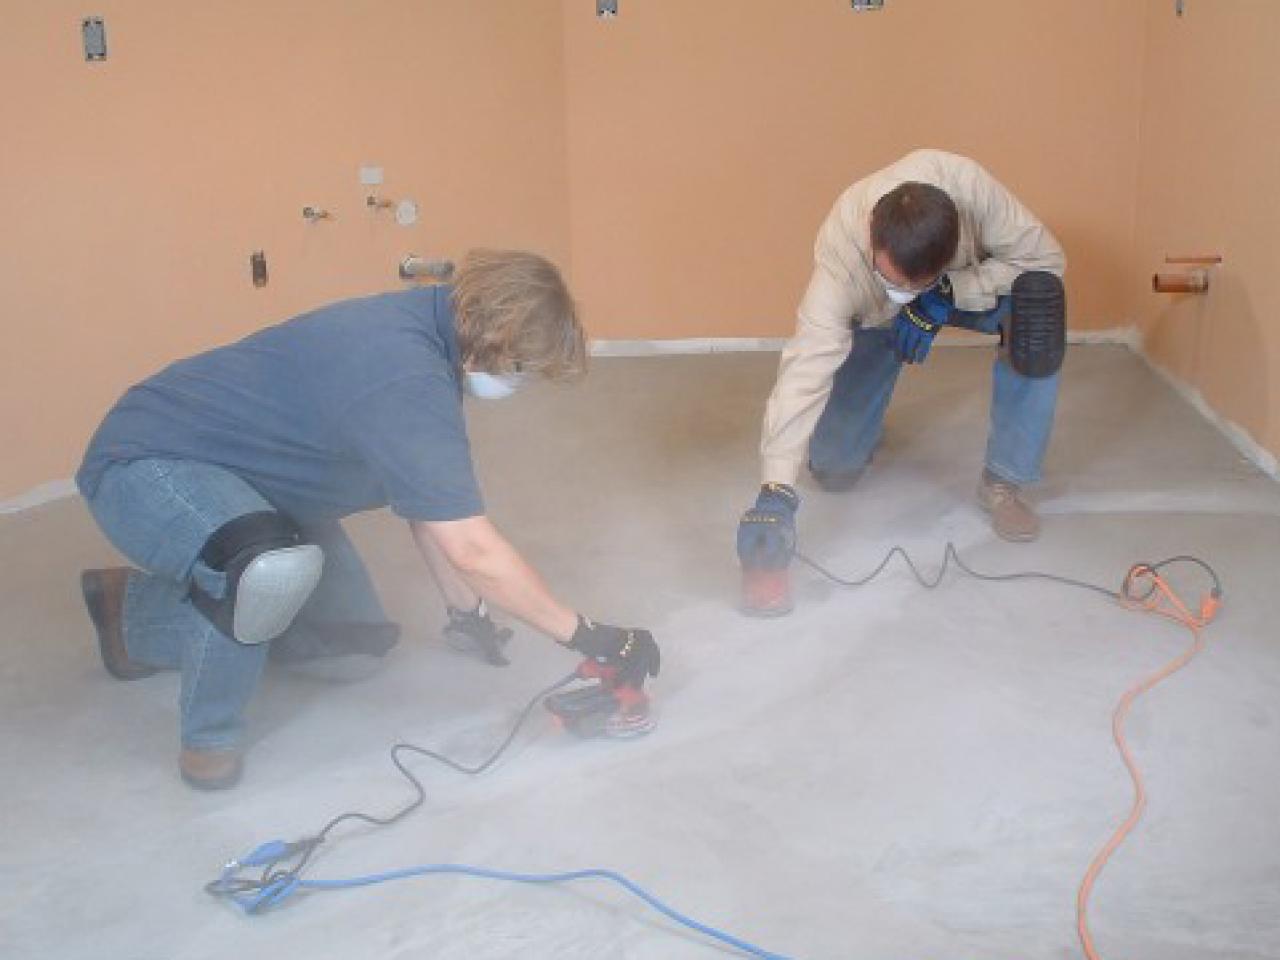 How To Install Vinyl Tile Flooring, How To Install Allure Vinyl Tile Flooring